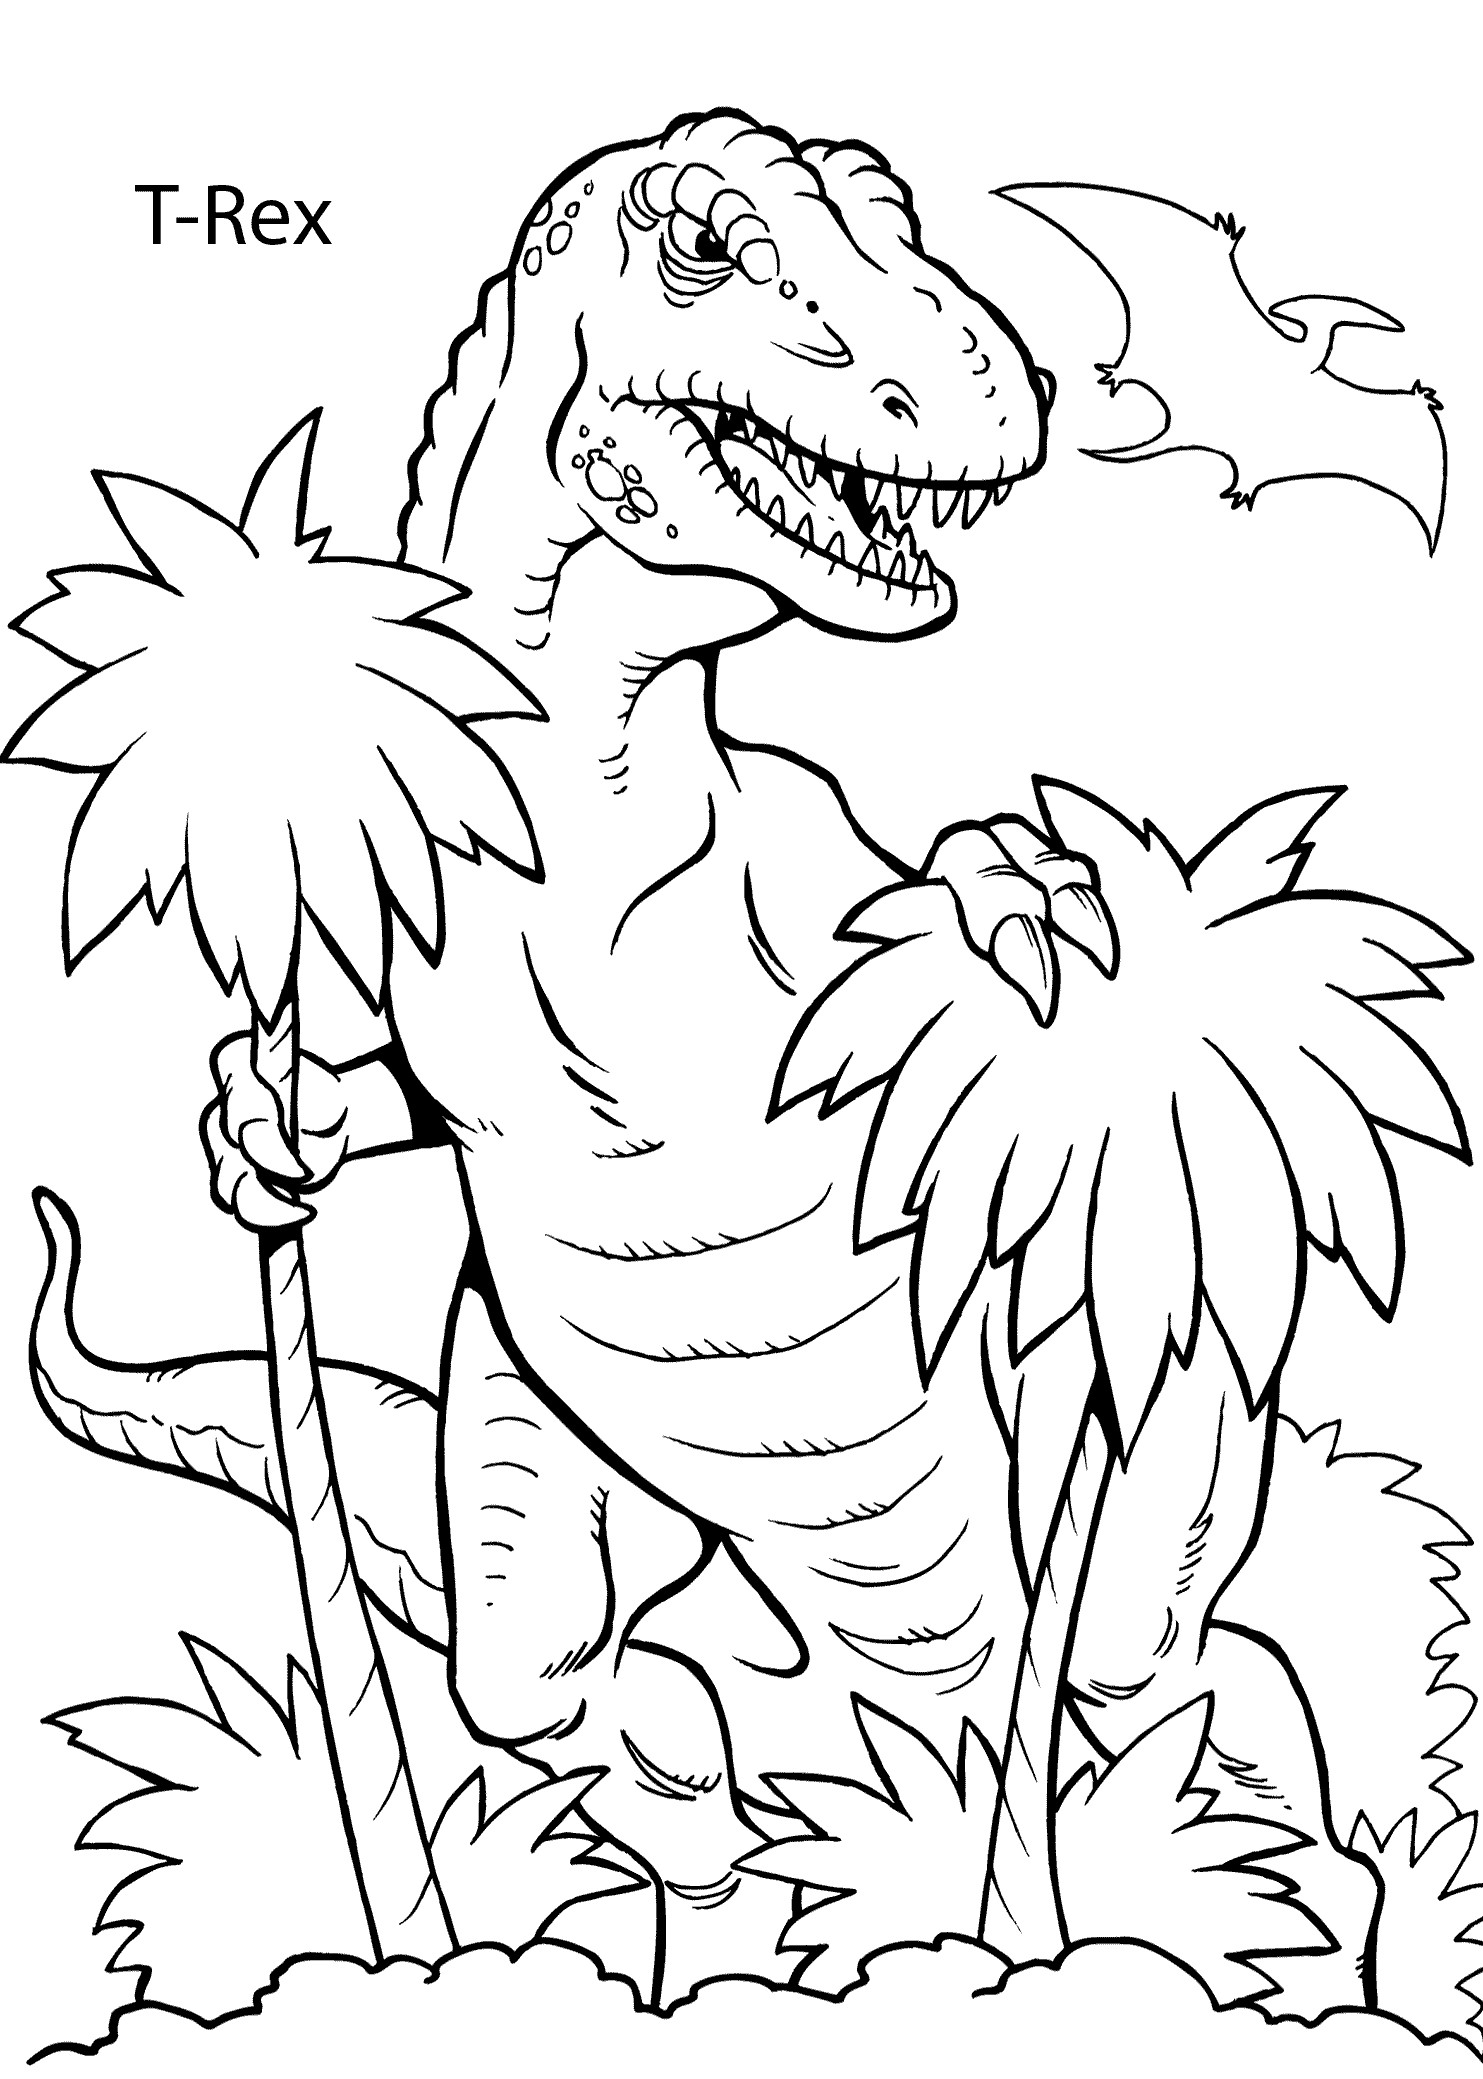 Coloring Pages For Kids Dinosaurs
 T Rex dinosaur coloring pages for kids printable free